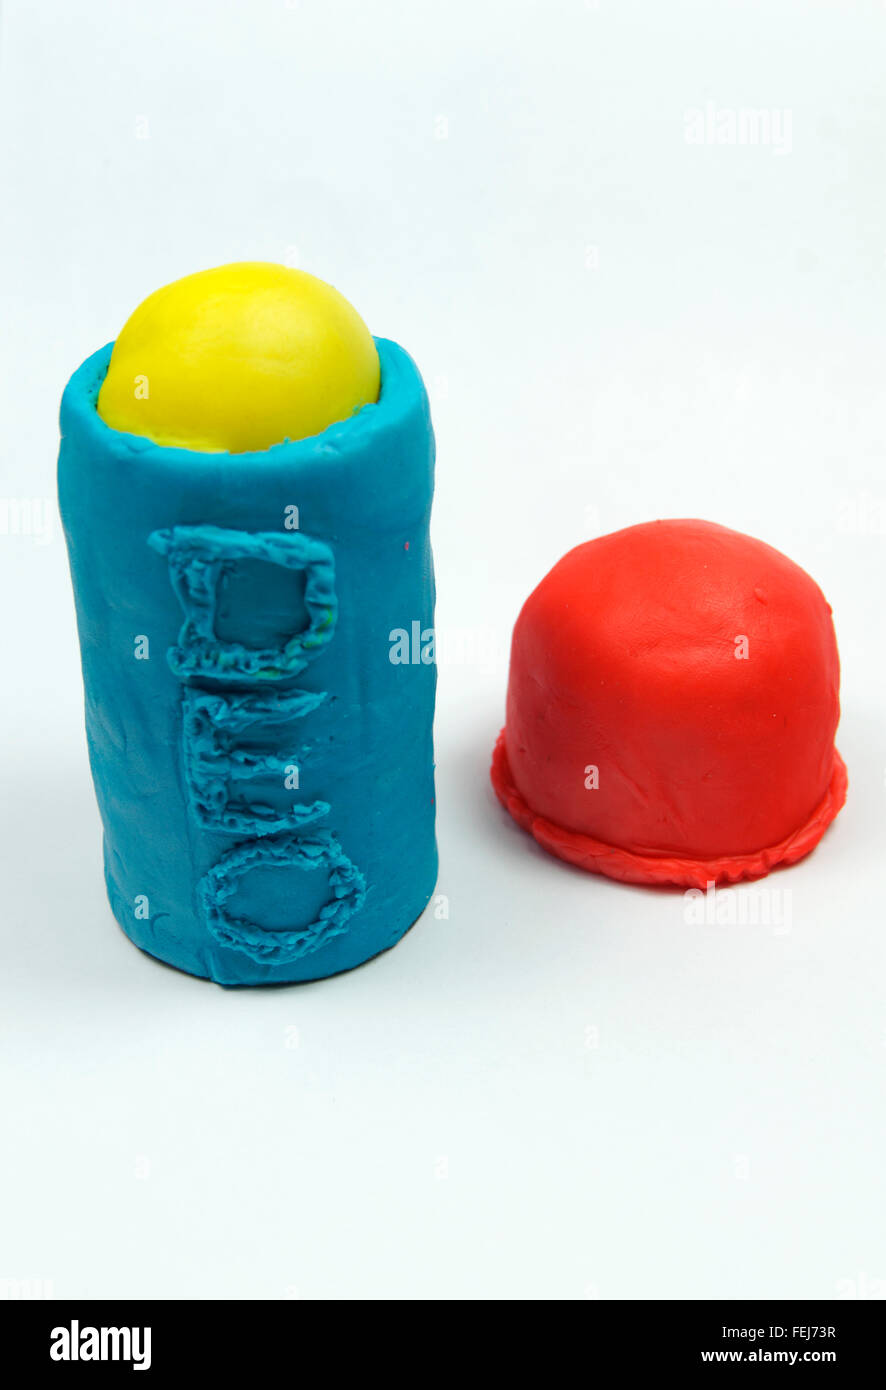 Imitation roll on deodorant made from  play doh. Stock Photo